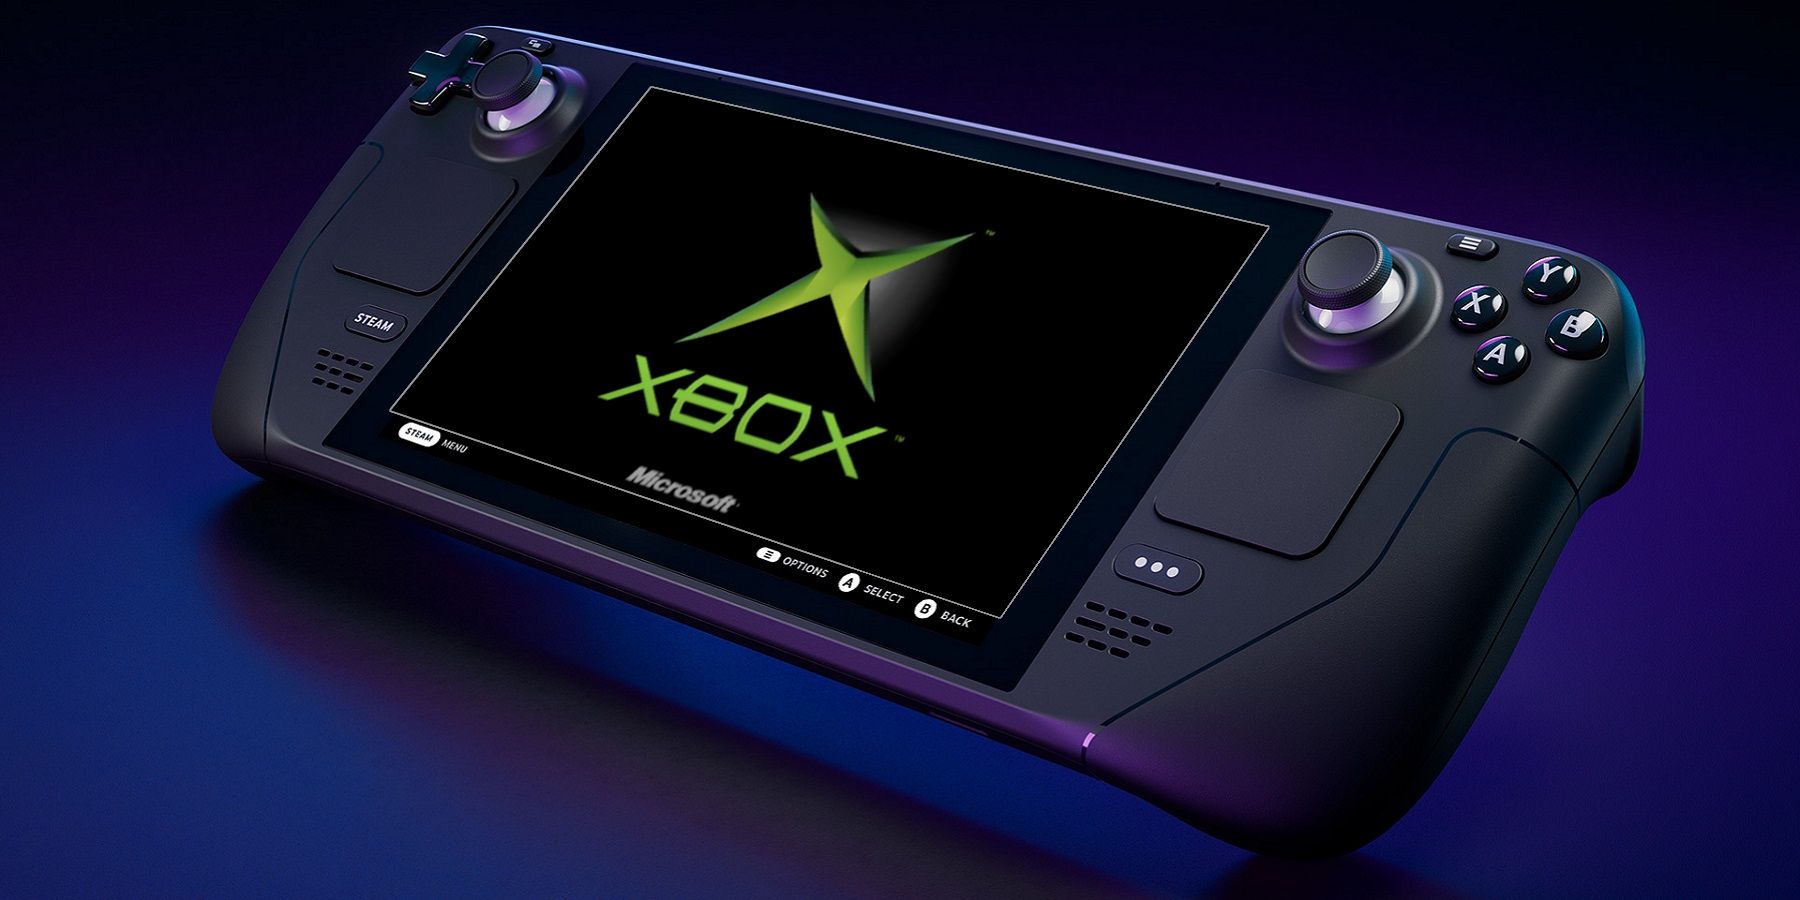 Image of a Steam Deck with the original Xbox logo on the screen.